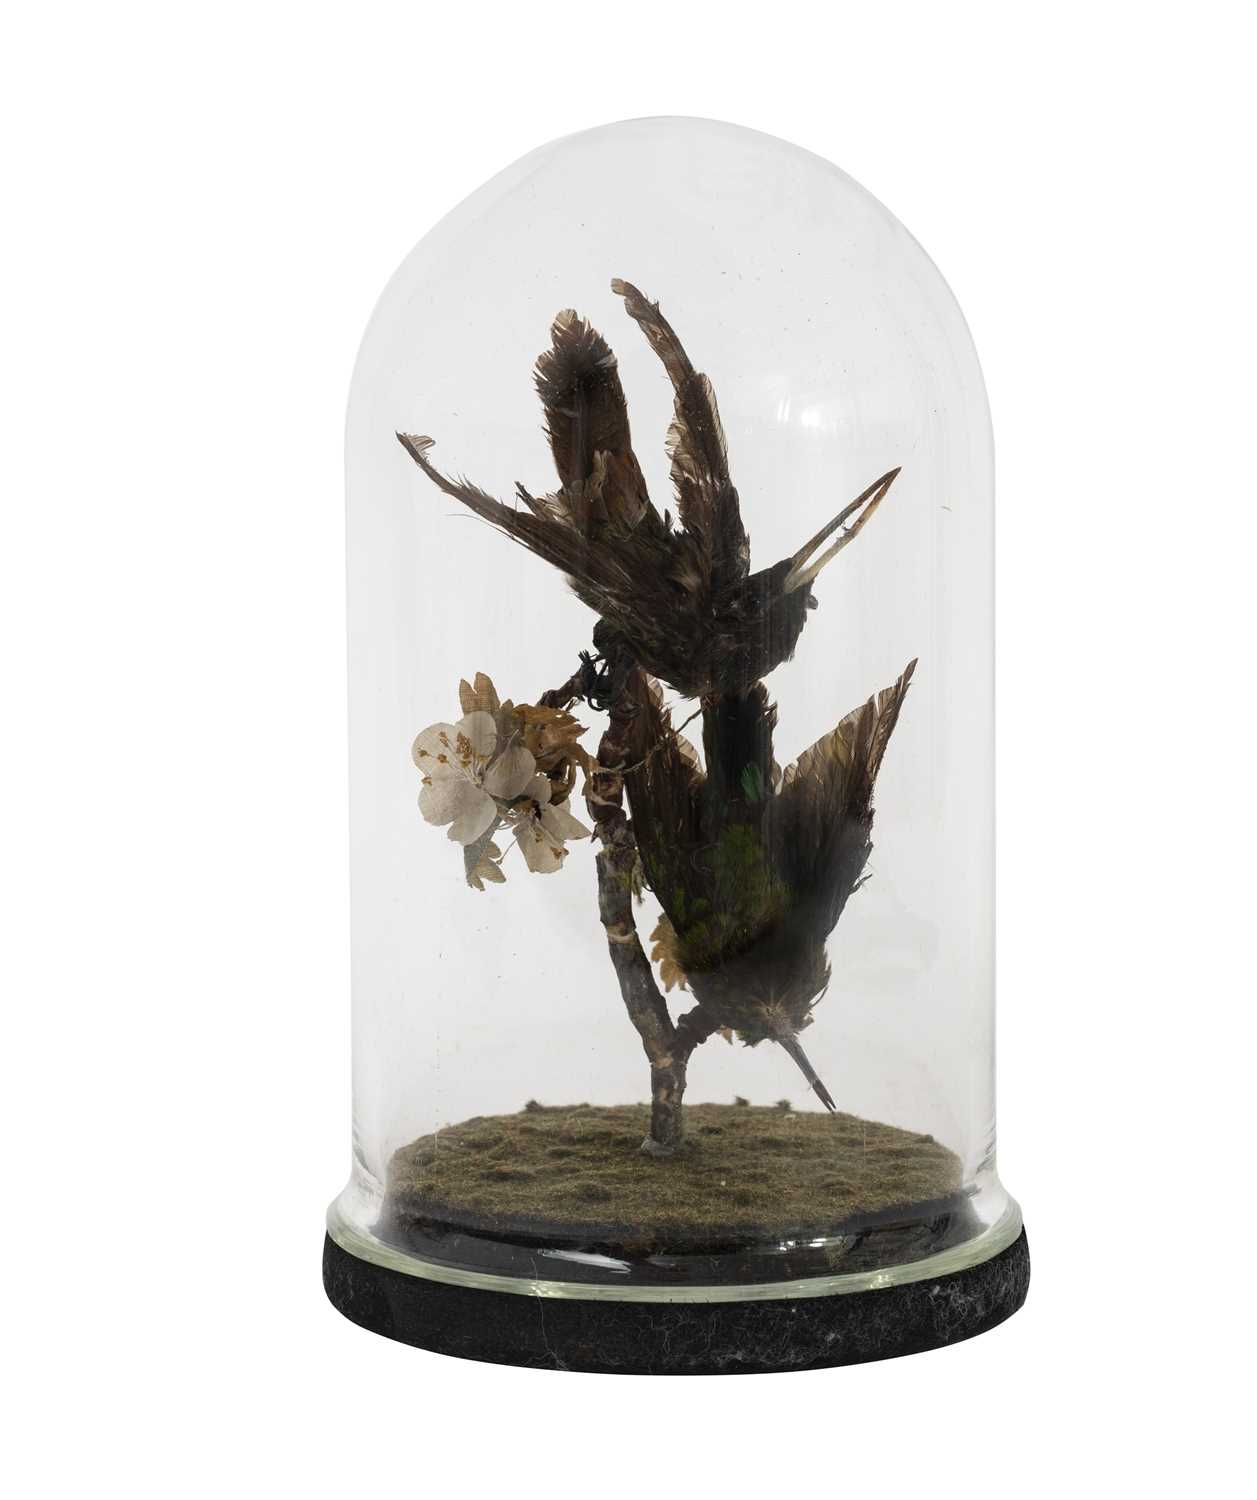 A PAIR OF HUMMINGBIRDS IN A GLASS DOME